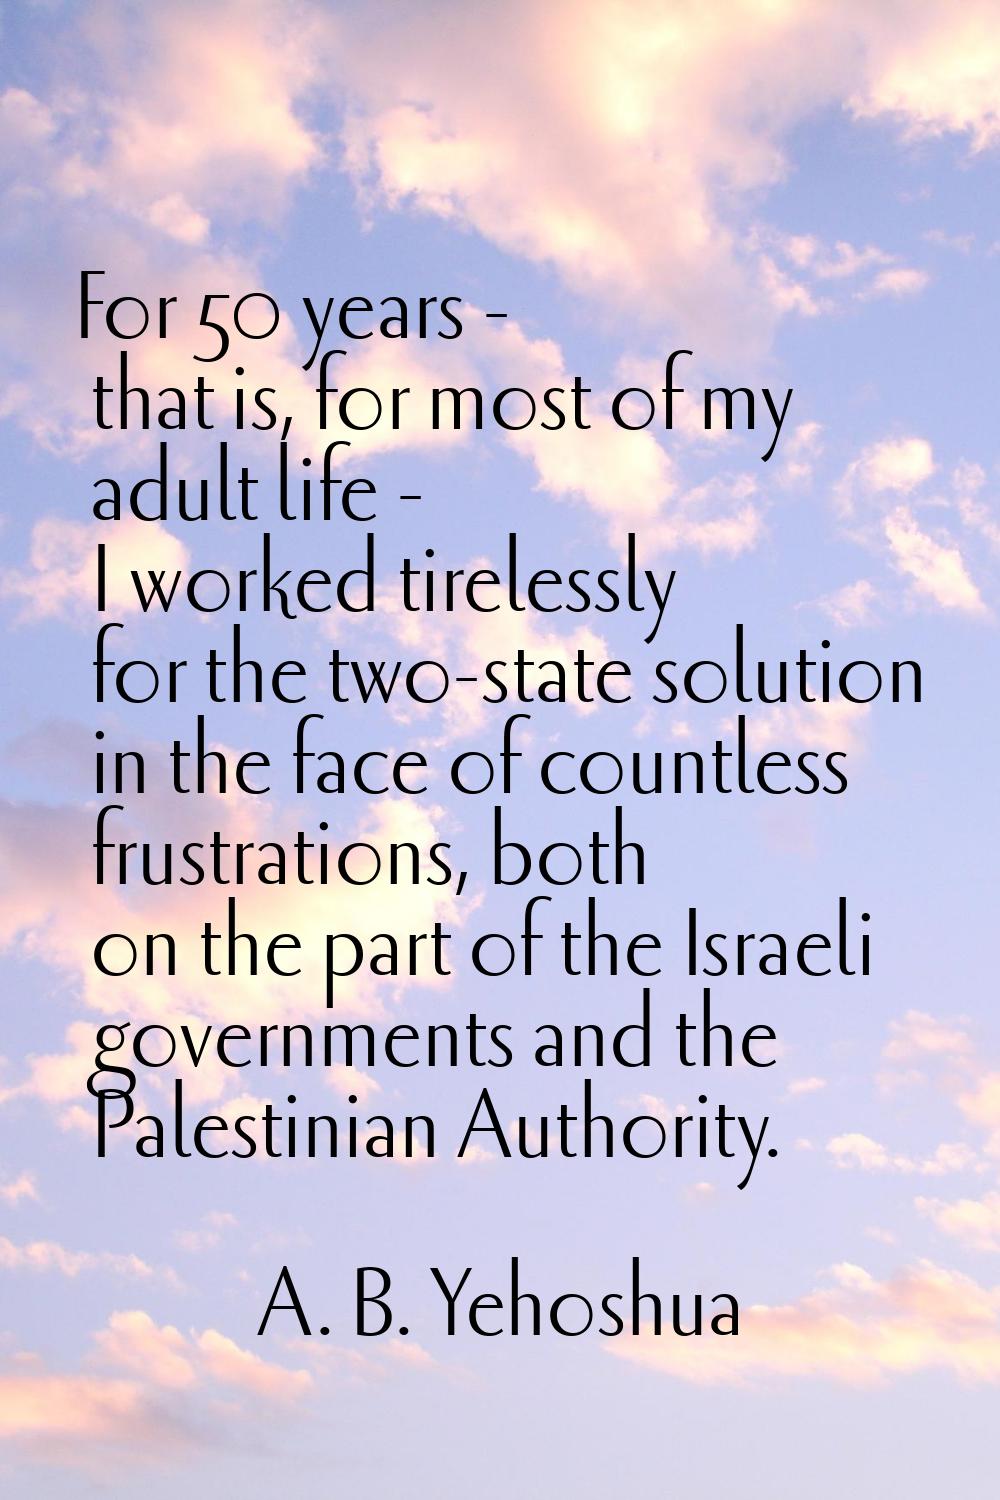 For 50 years - that is, for most of my adult life - I worked tirelessly for the two-state solution 